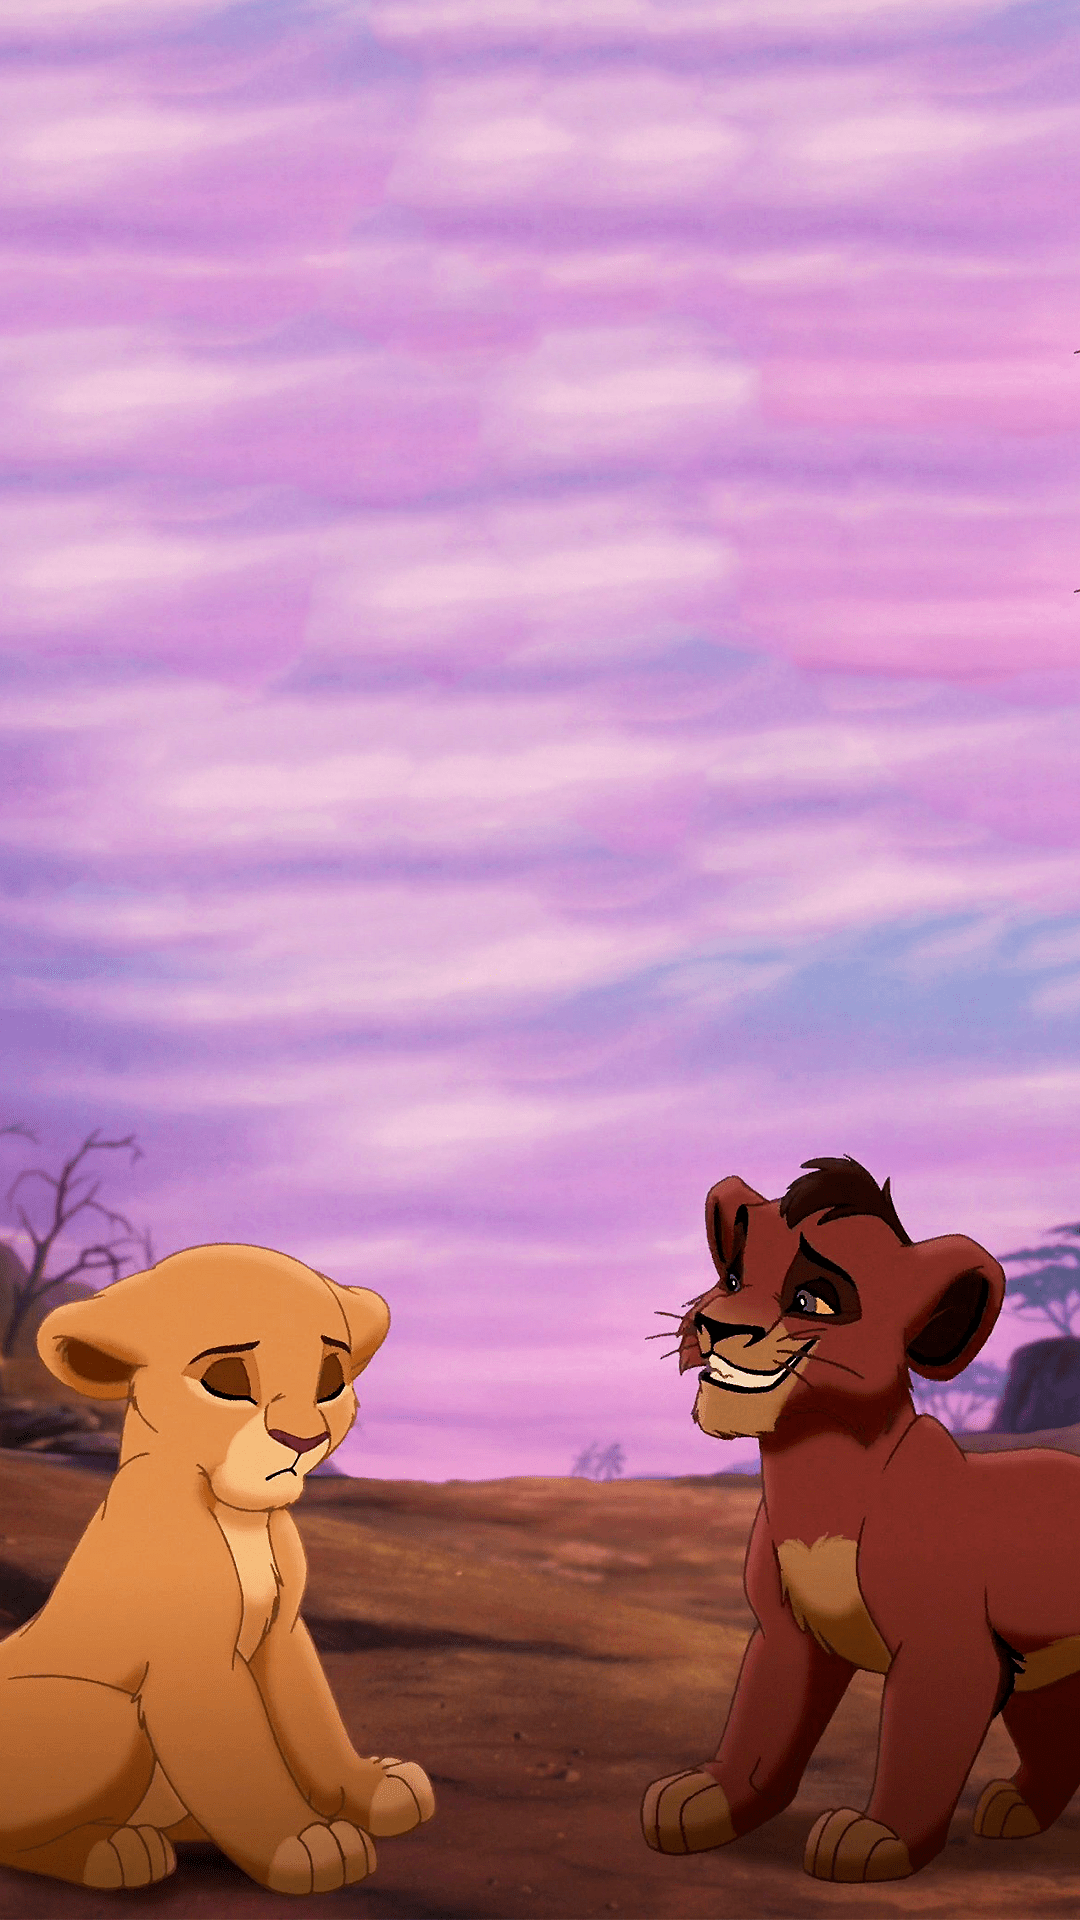 Lion King 2 background can find the rest on my website - Lion king picture, Lion king movie, Disney characters wallpaper